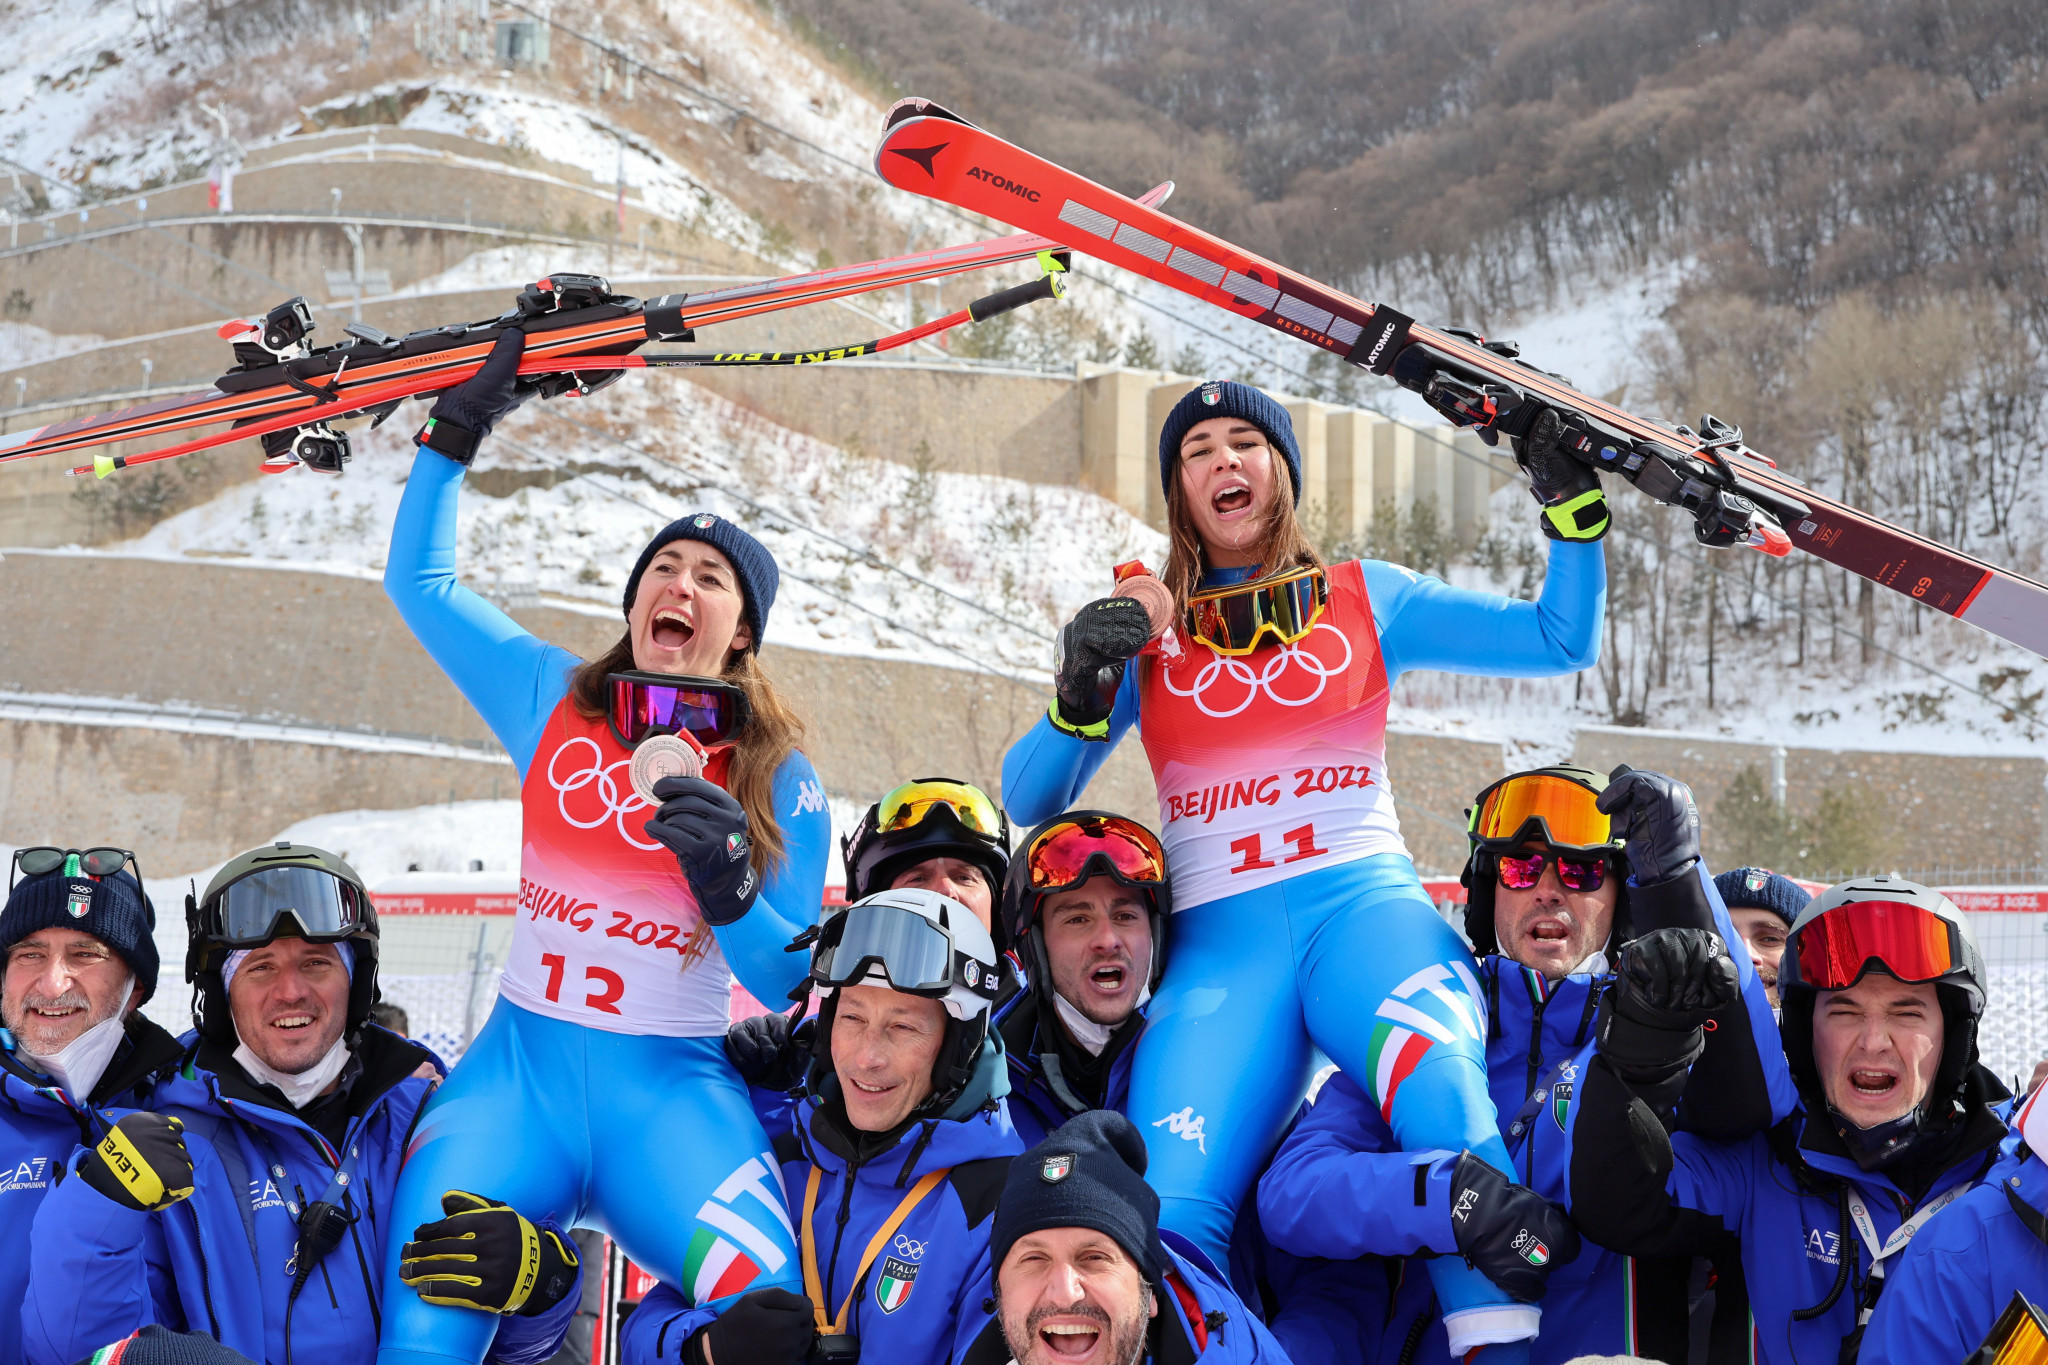 Sofia Goggia, left, and Nadia Delago, right, celebrated with the Italian team following their silver and bronze medals, which were hard earned for different reasons ©Getty Images